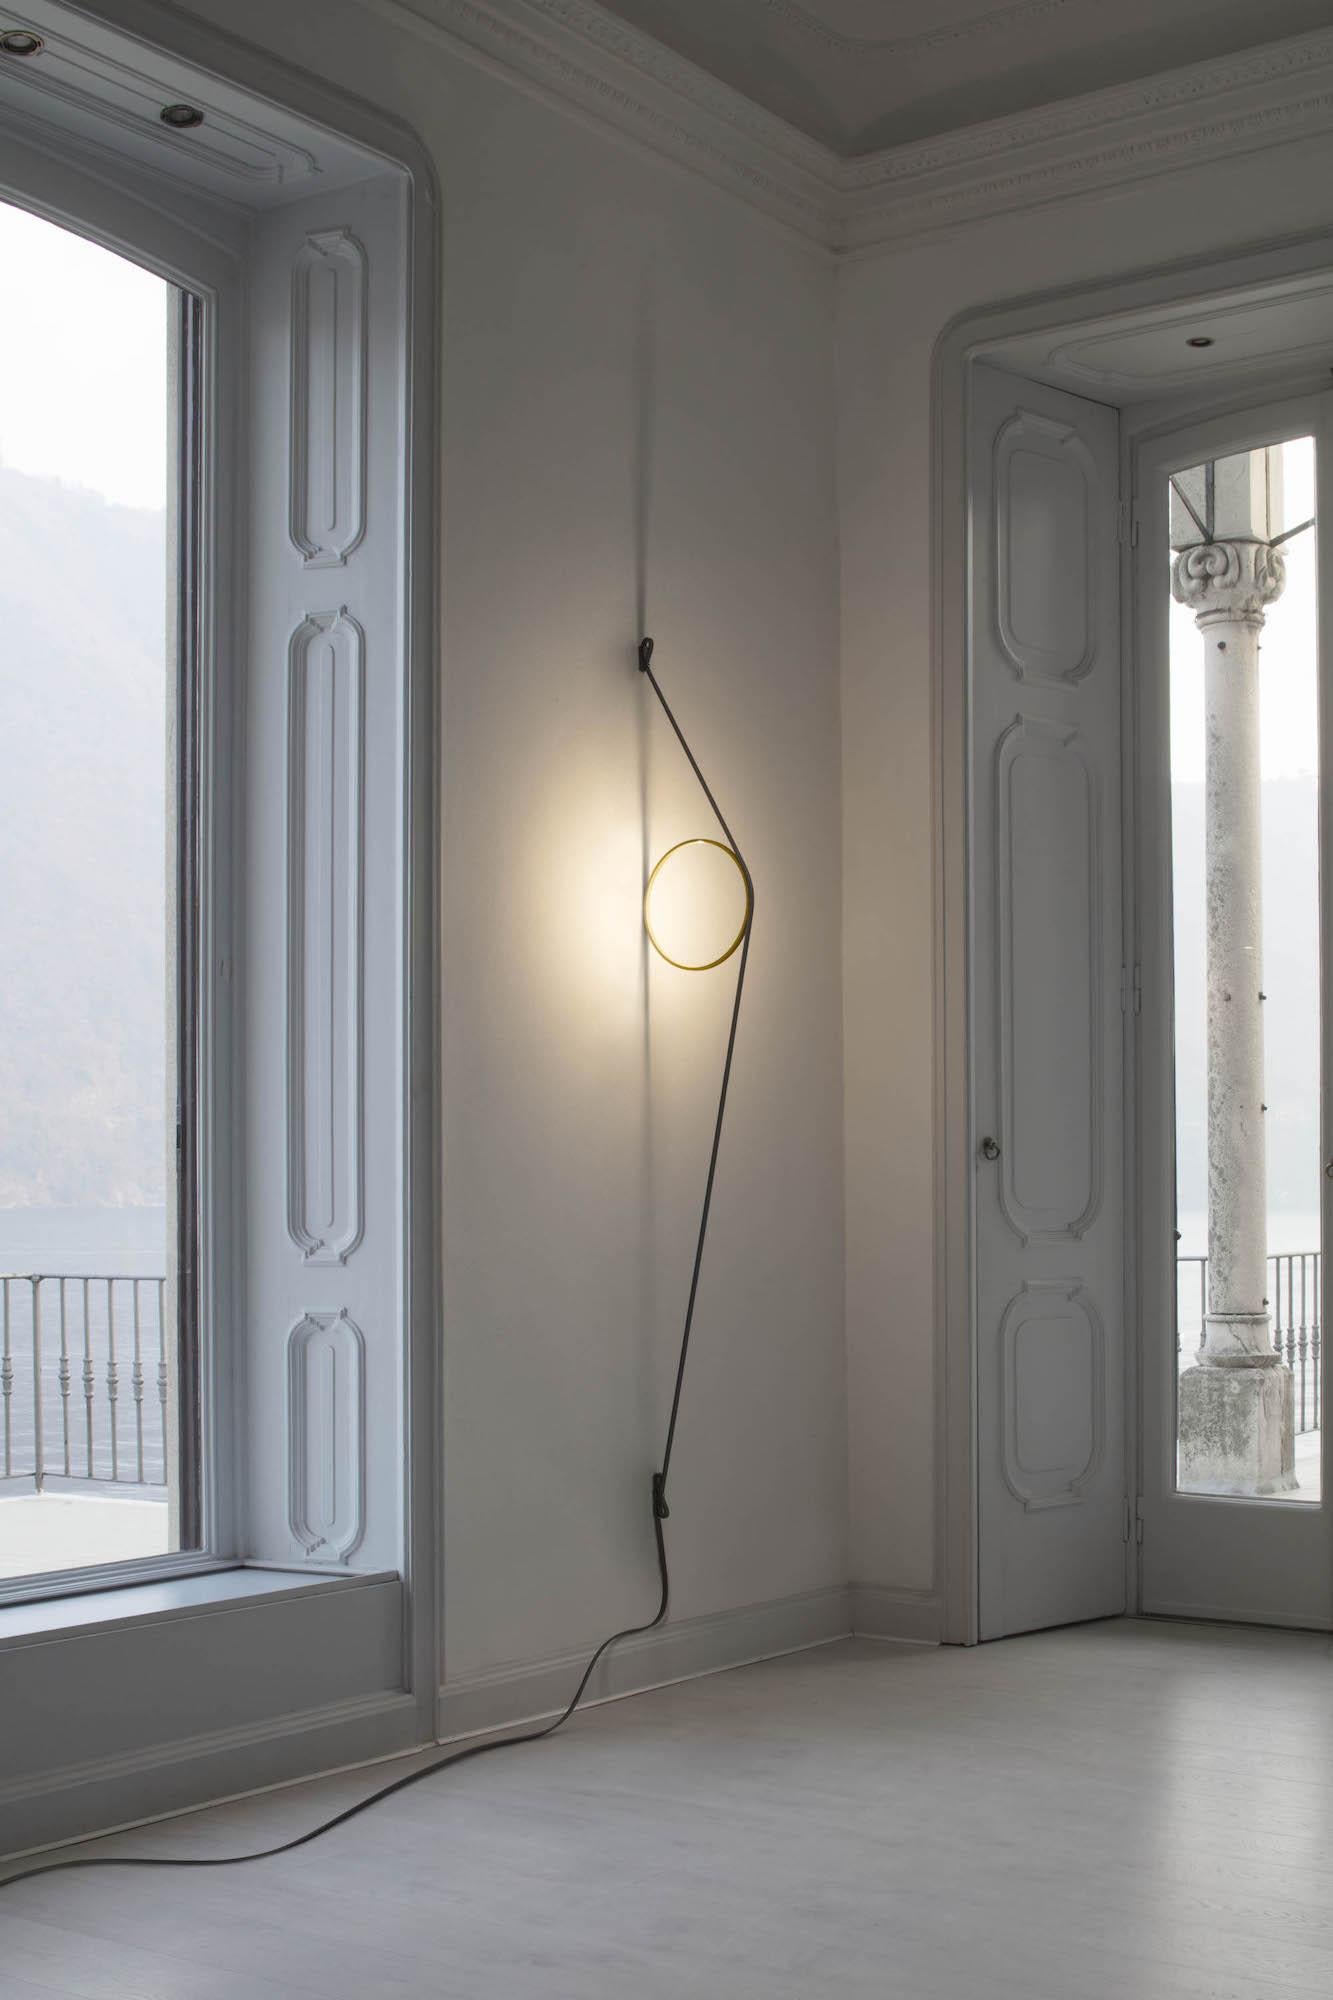 FLOS Wirering Wall Light in Grey by Formafantasma In New Condition For Sale In Brooklyn, NY